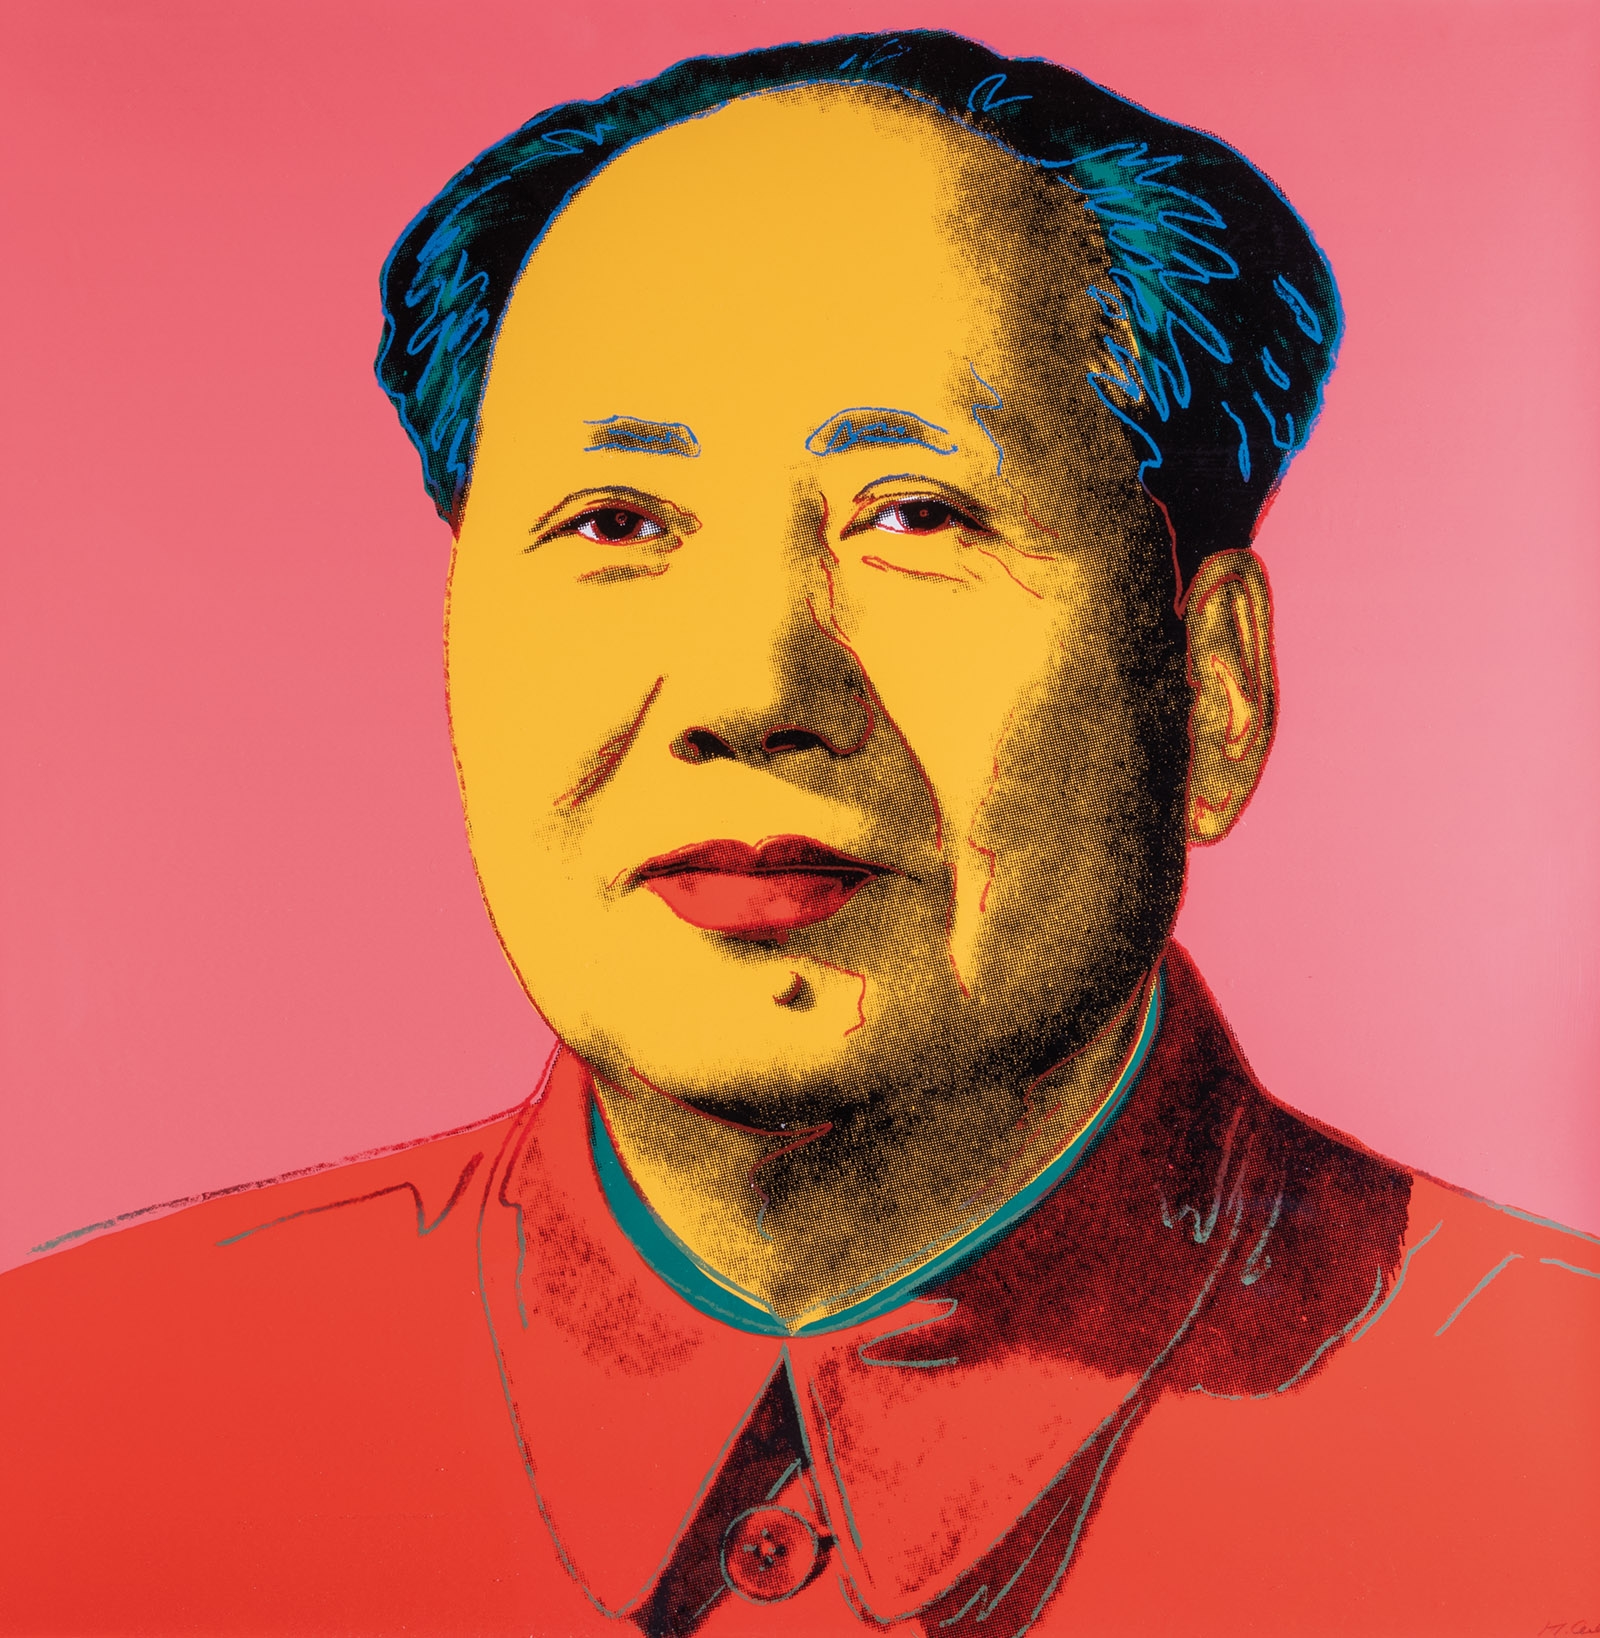 Artwork by Andy Warhol, HA Schult, Mao Tse-tung, Made of Colored screen printing on paper